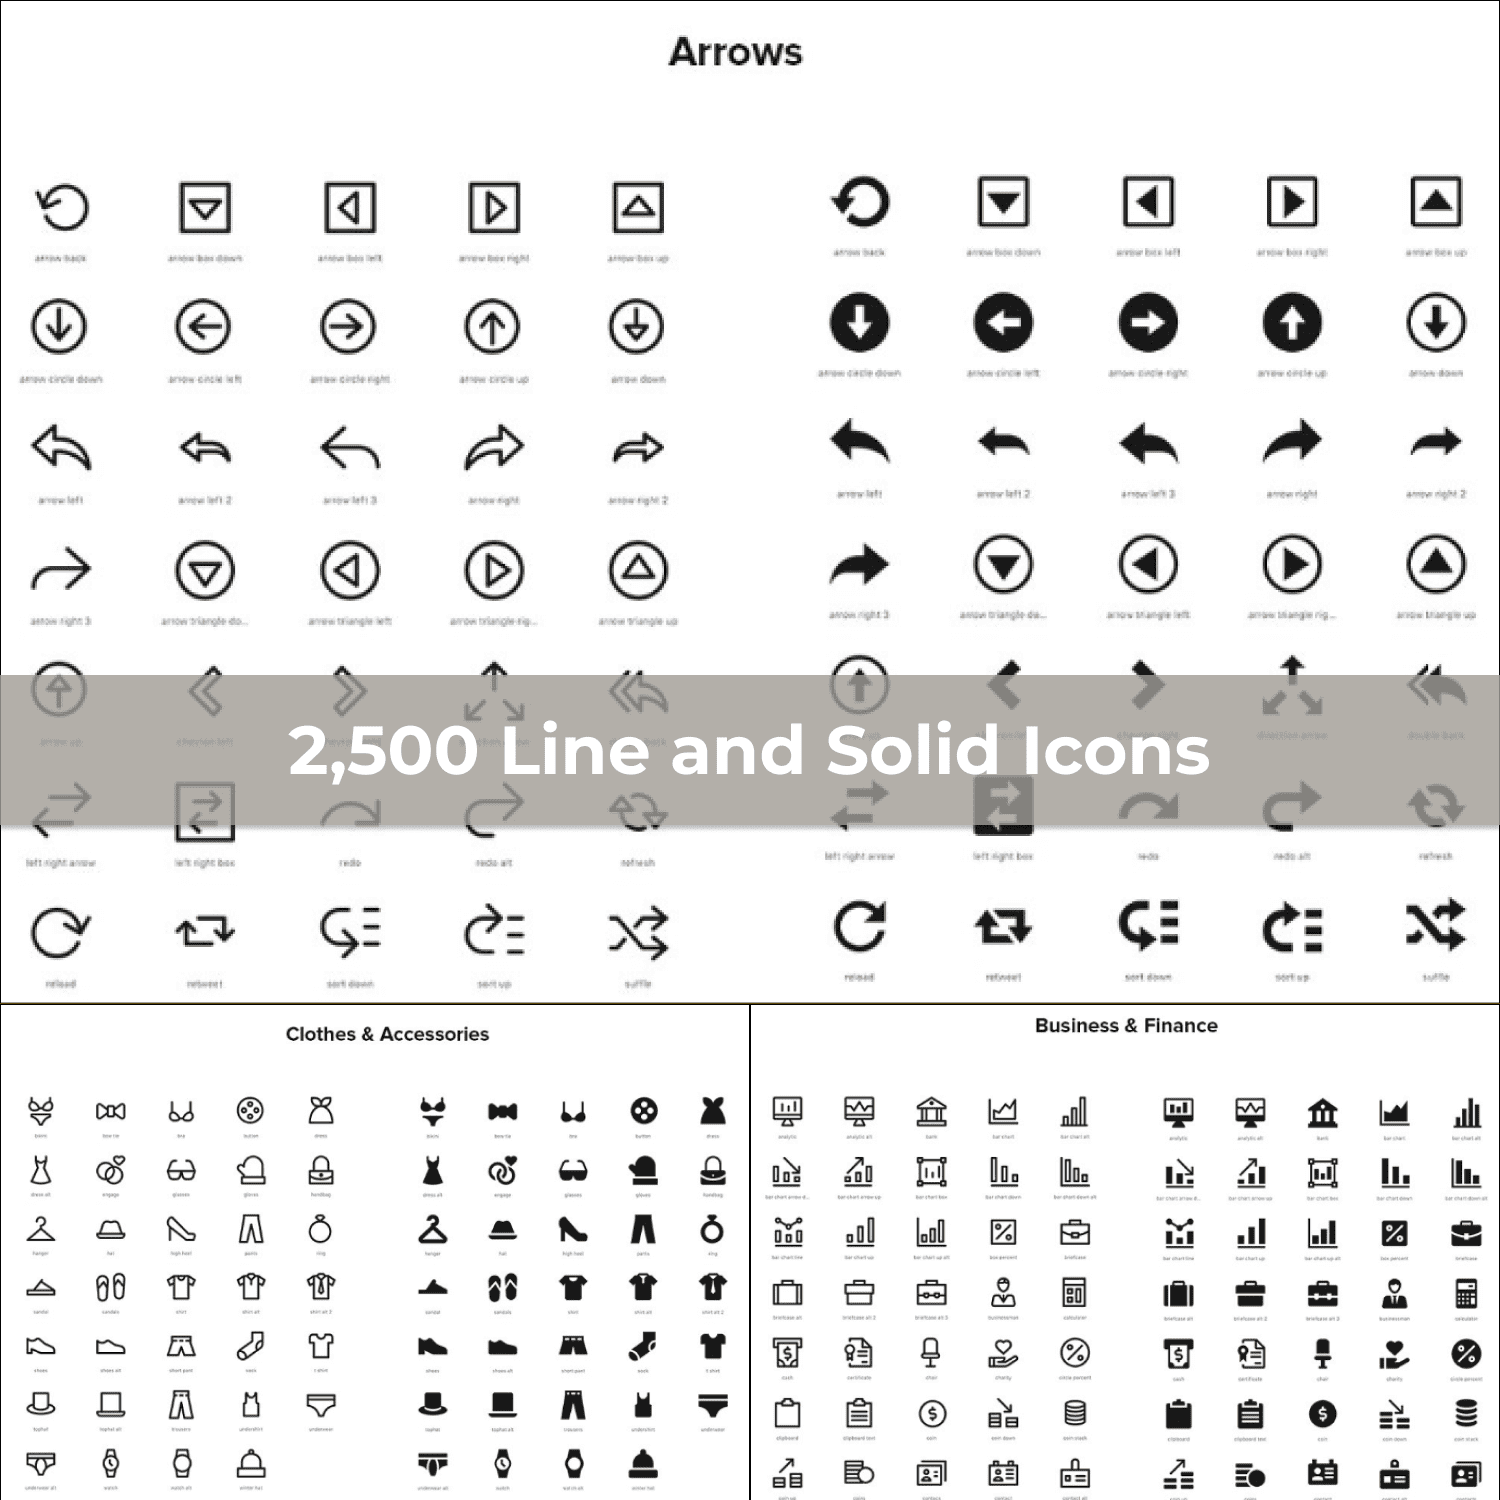 2,500 Line and Solid Icons cover image.